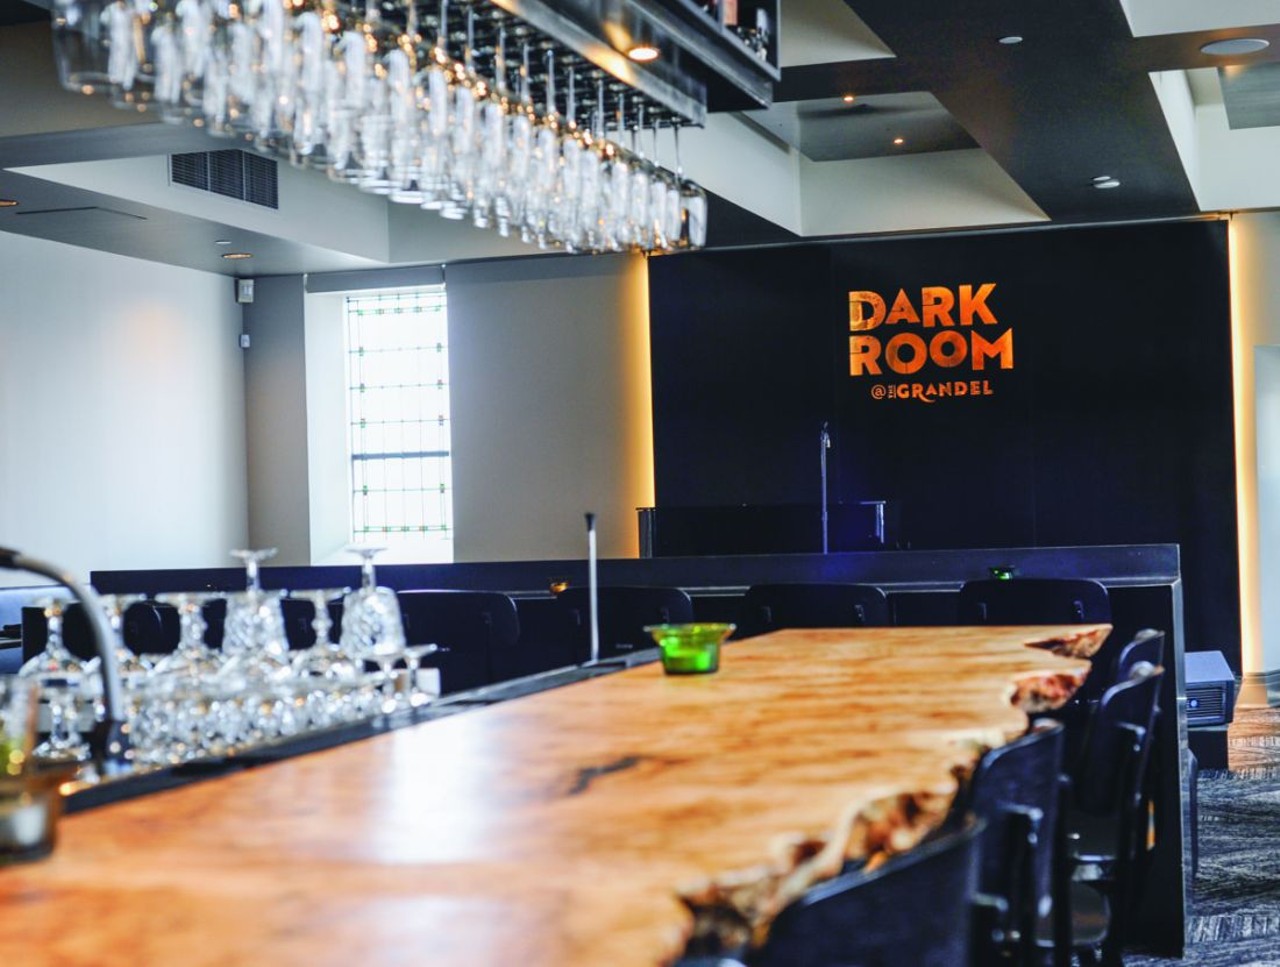 10 Photos of the Dark Room's New Home at the Grandel Theatre